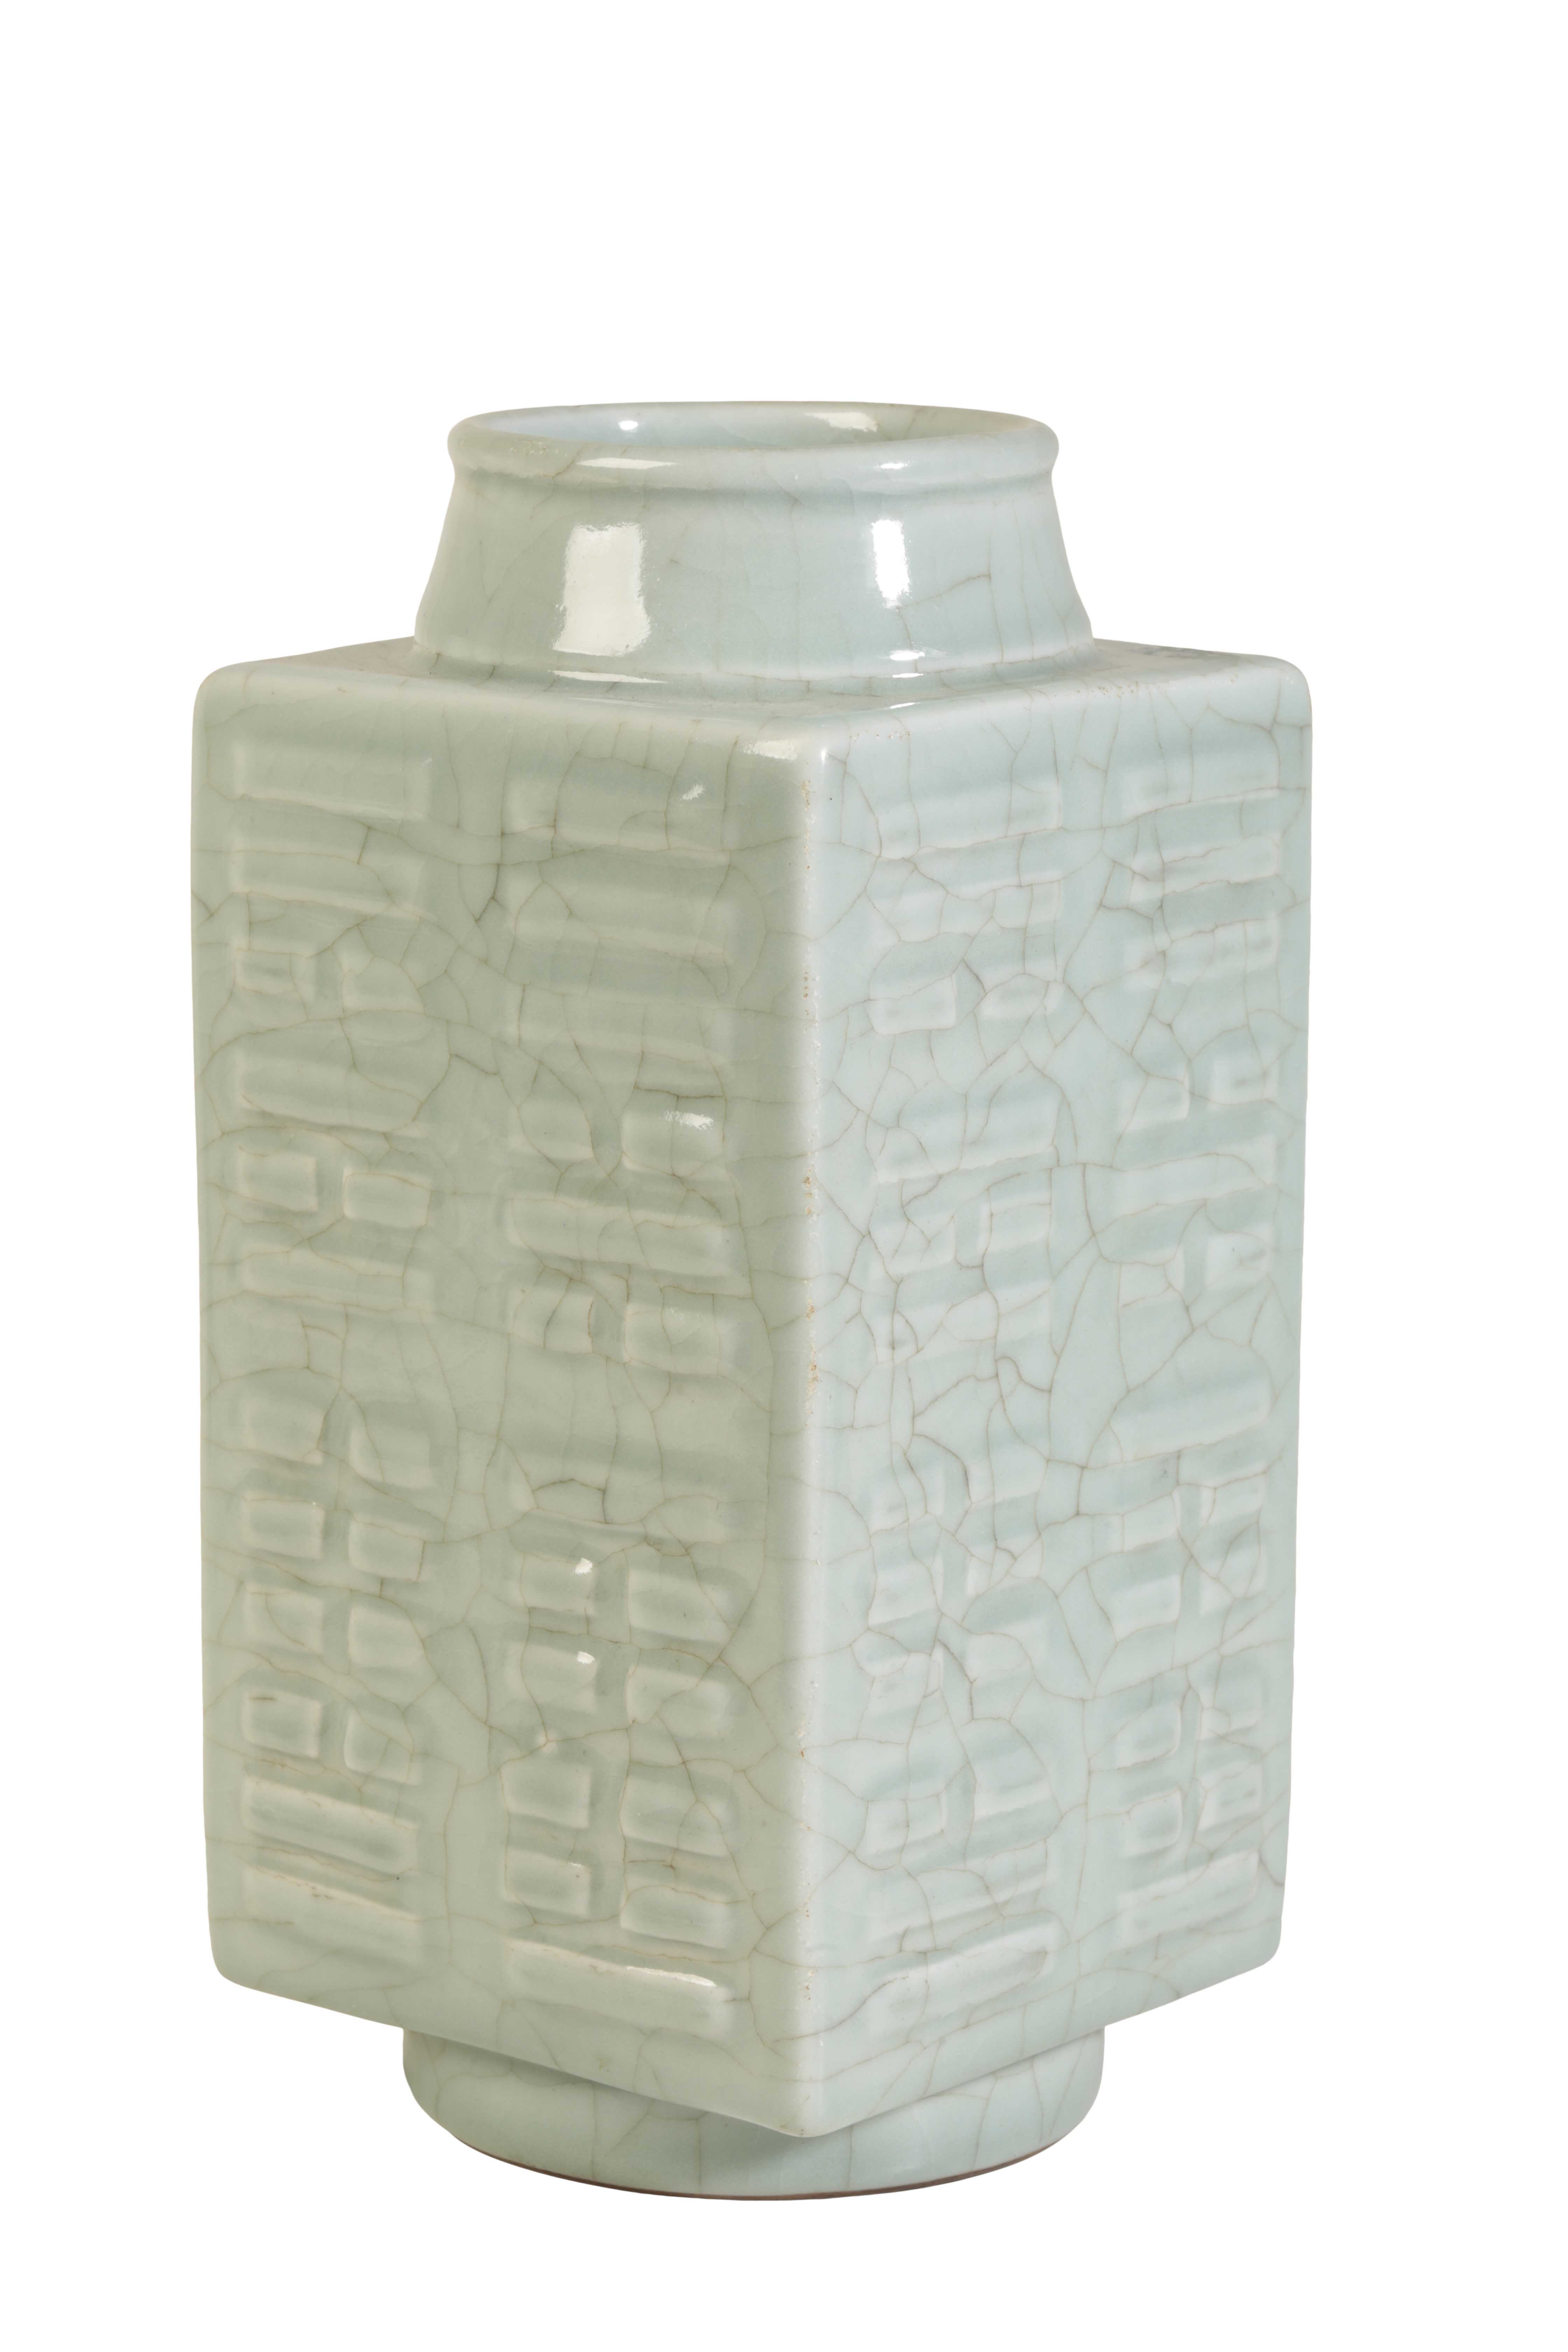 A CHINESE CELADON "CONG" VASE of